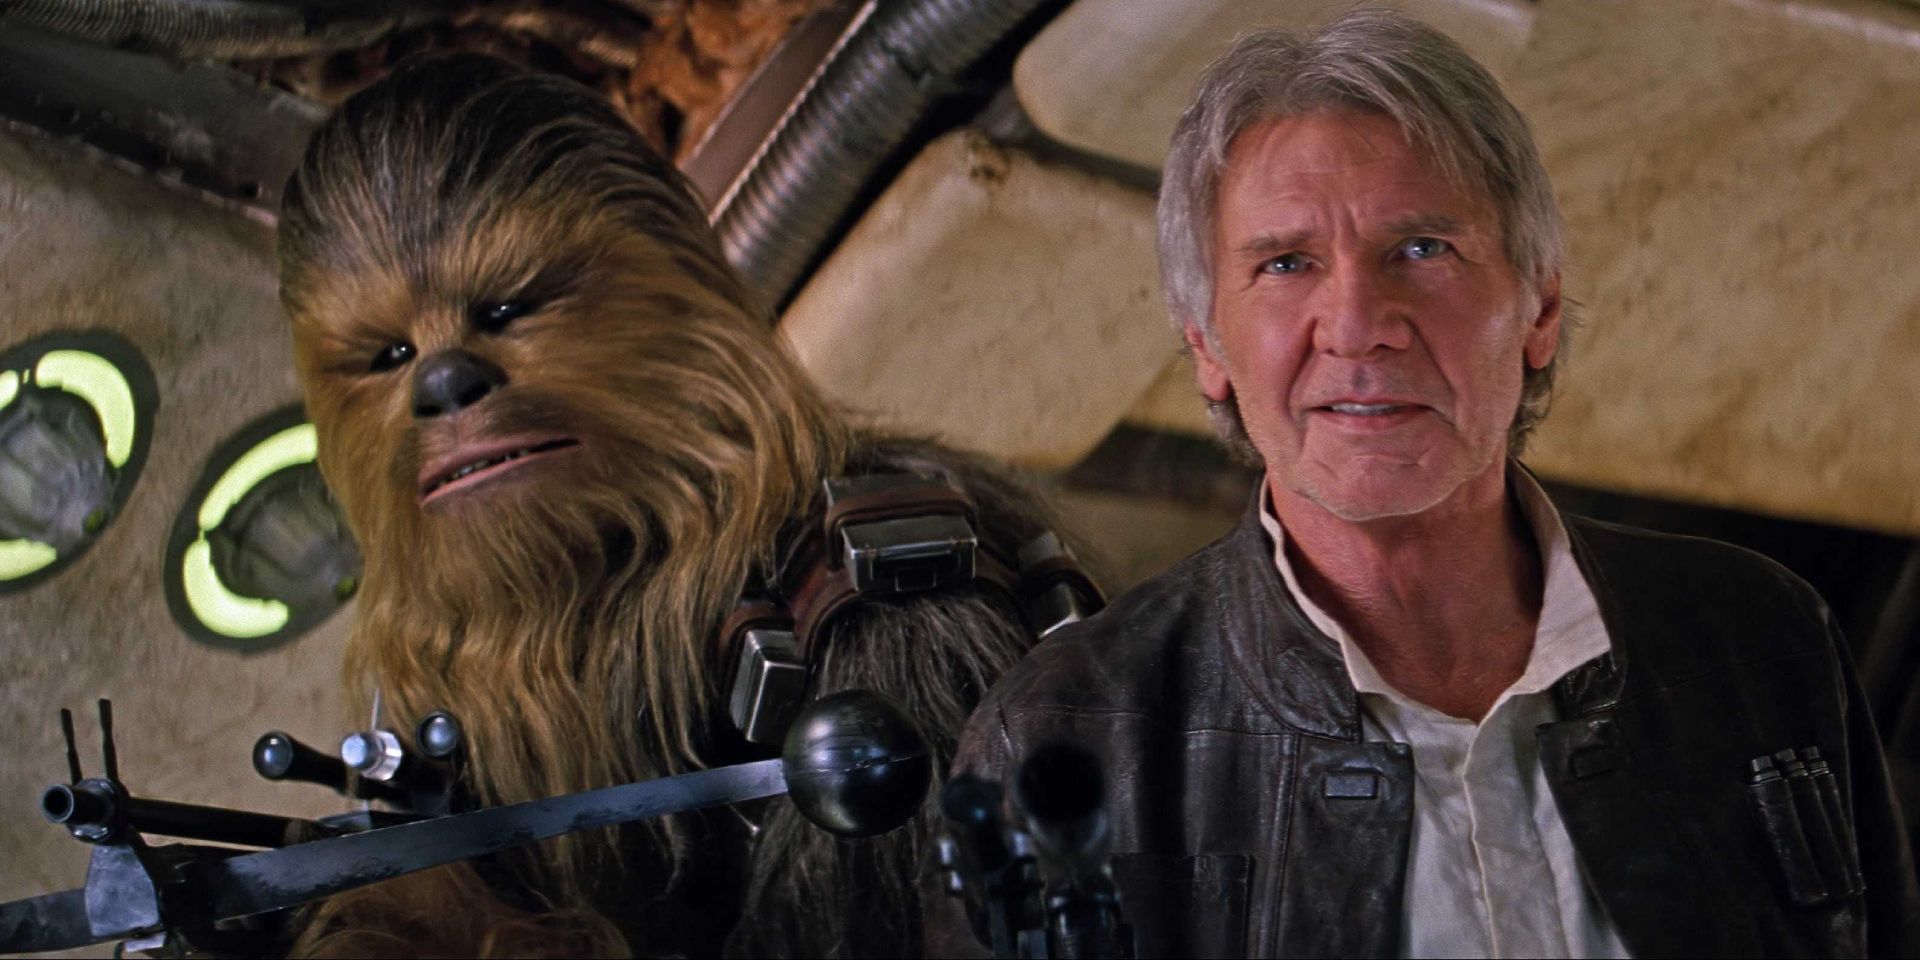 Han and Chewie step onto the Millenium Falcon in Star Wars: The Force Awakens